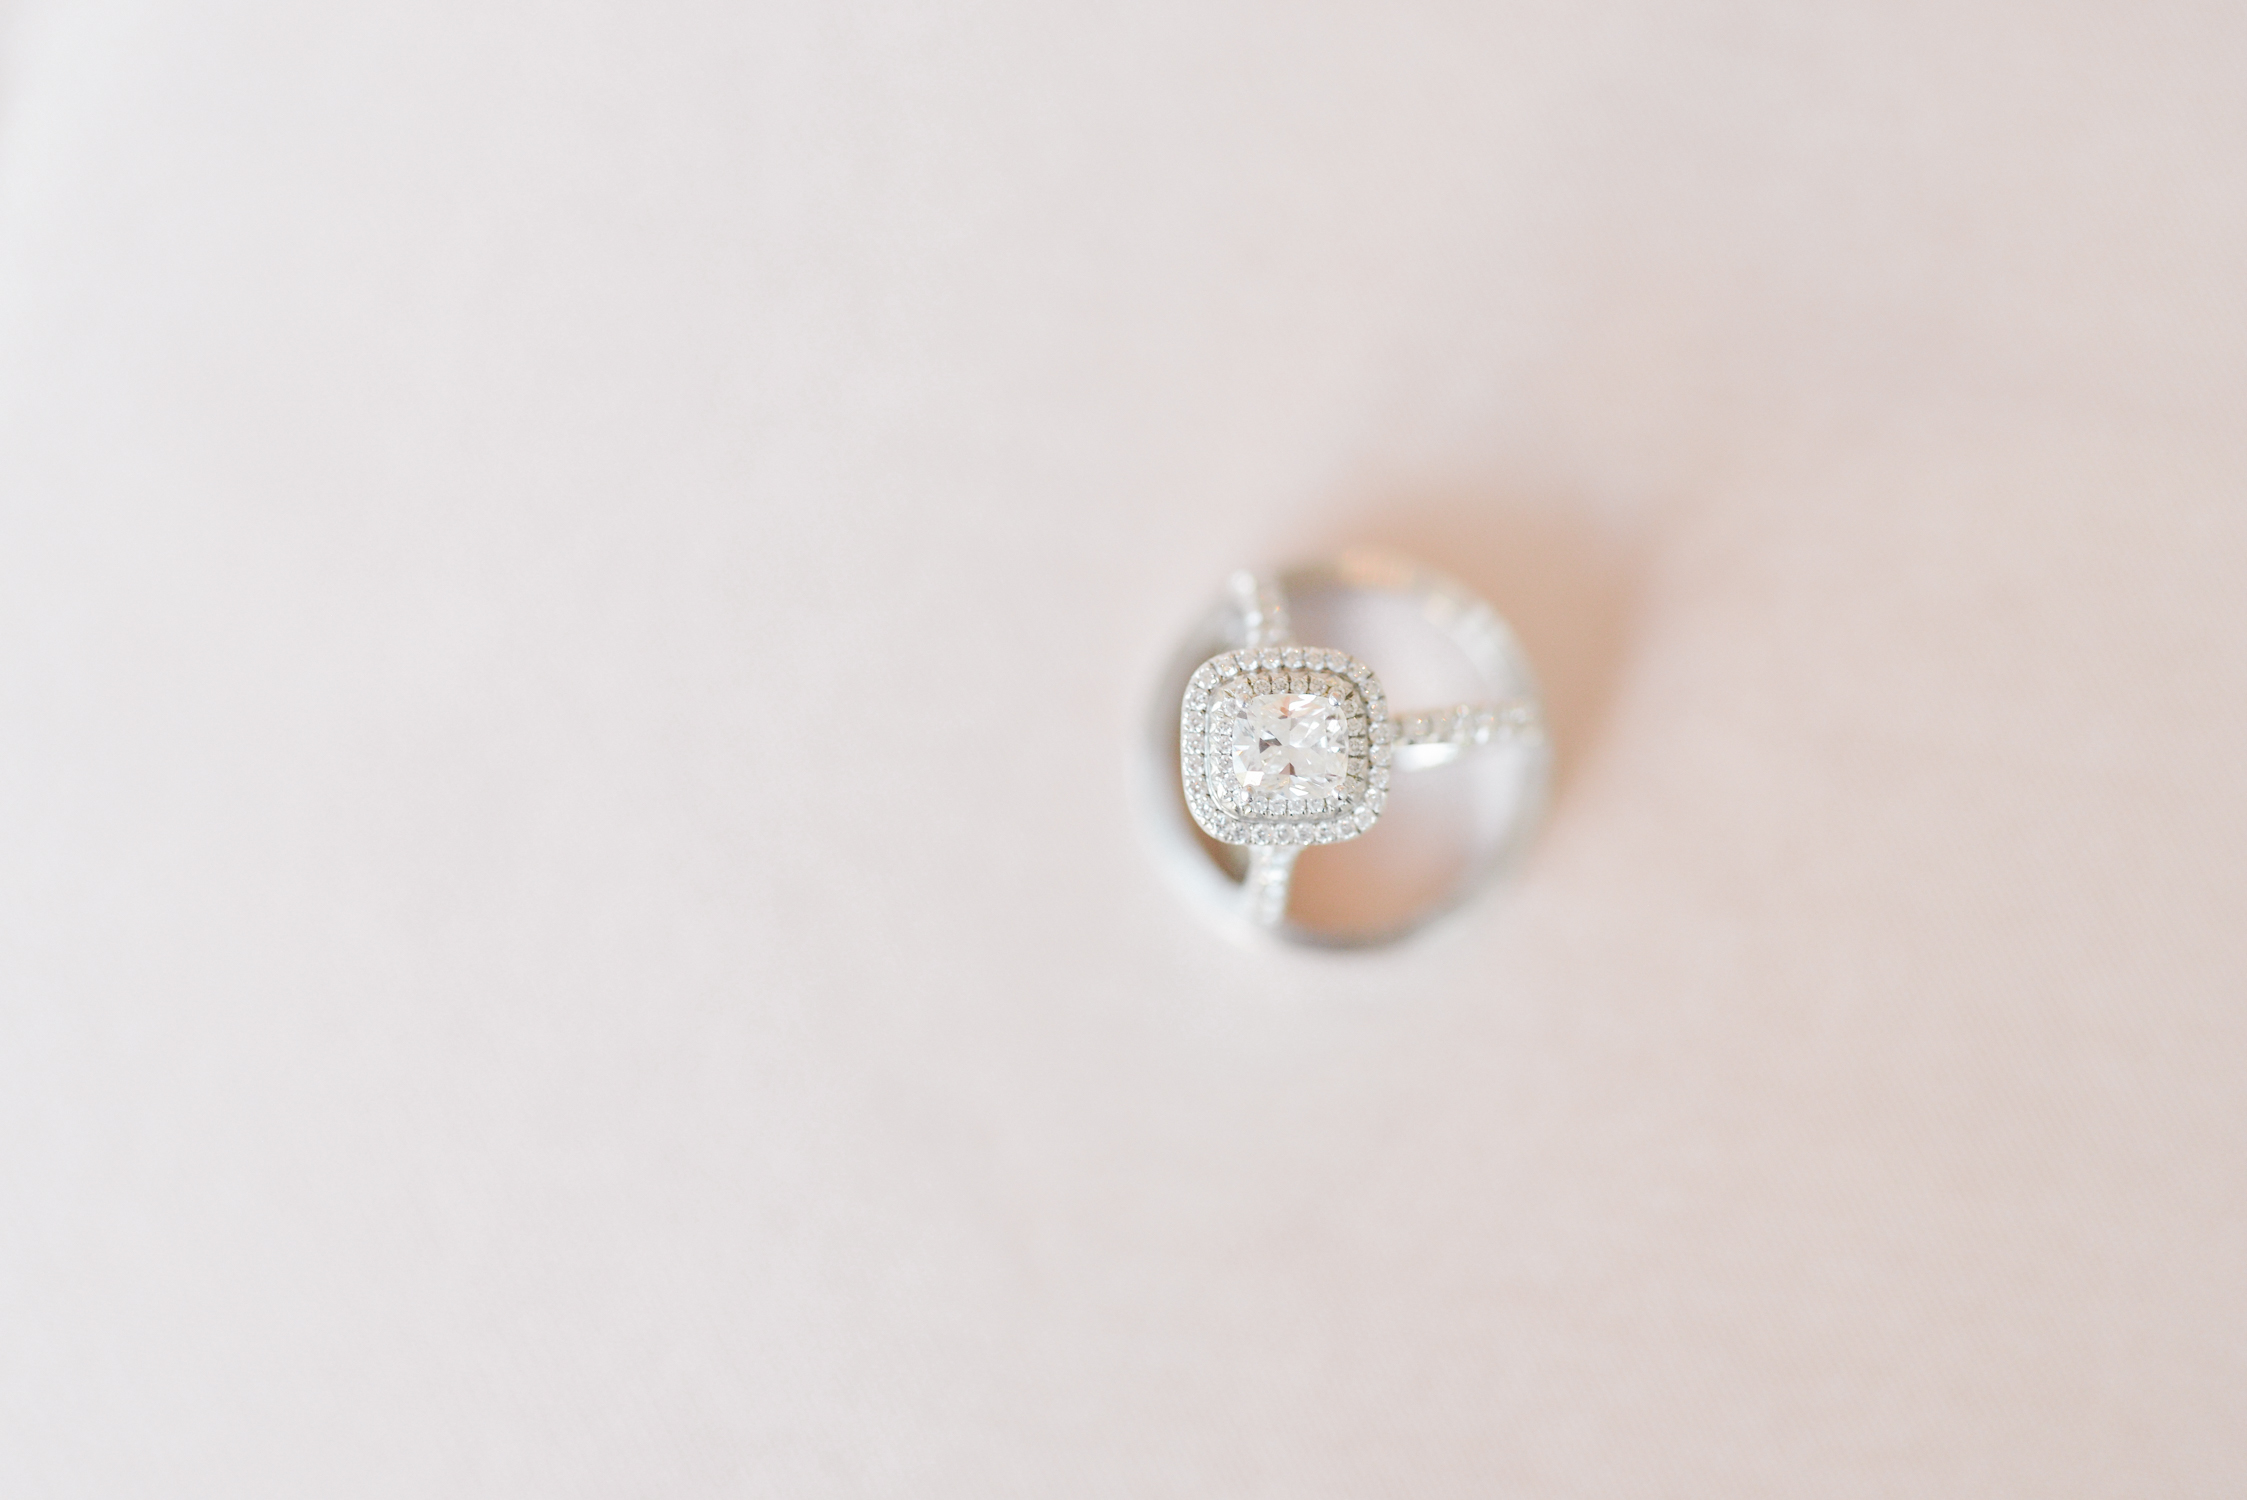 Square diamond ring with pink background